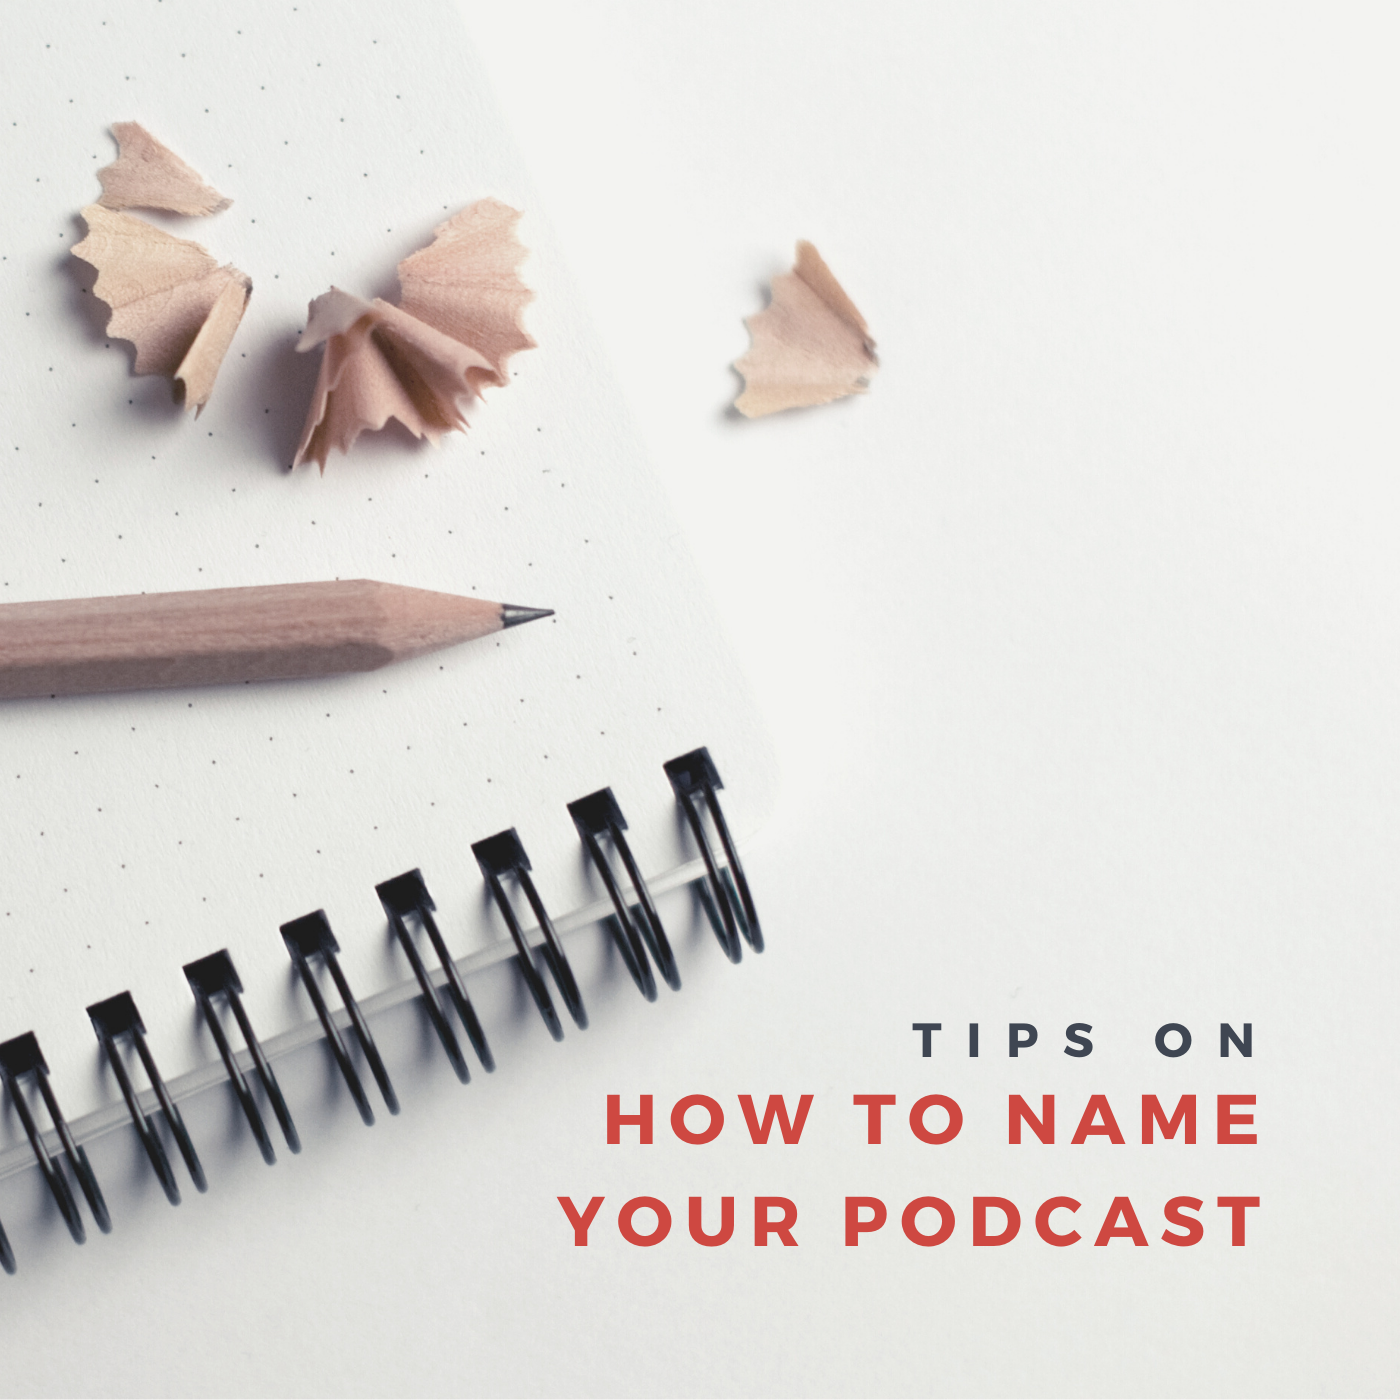 How to name a podcast?